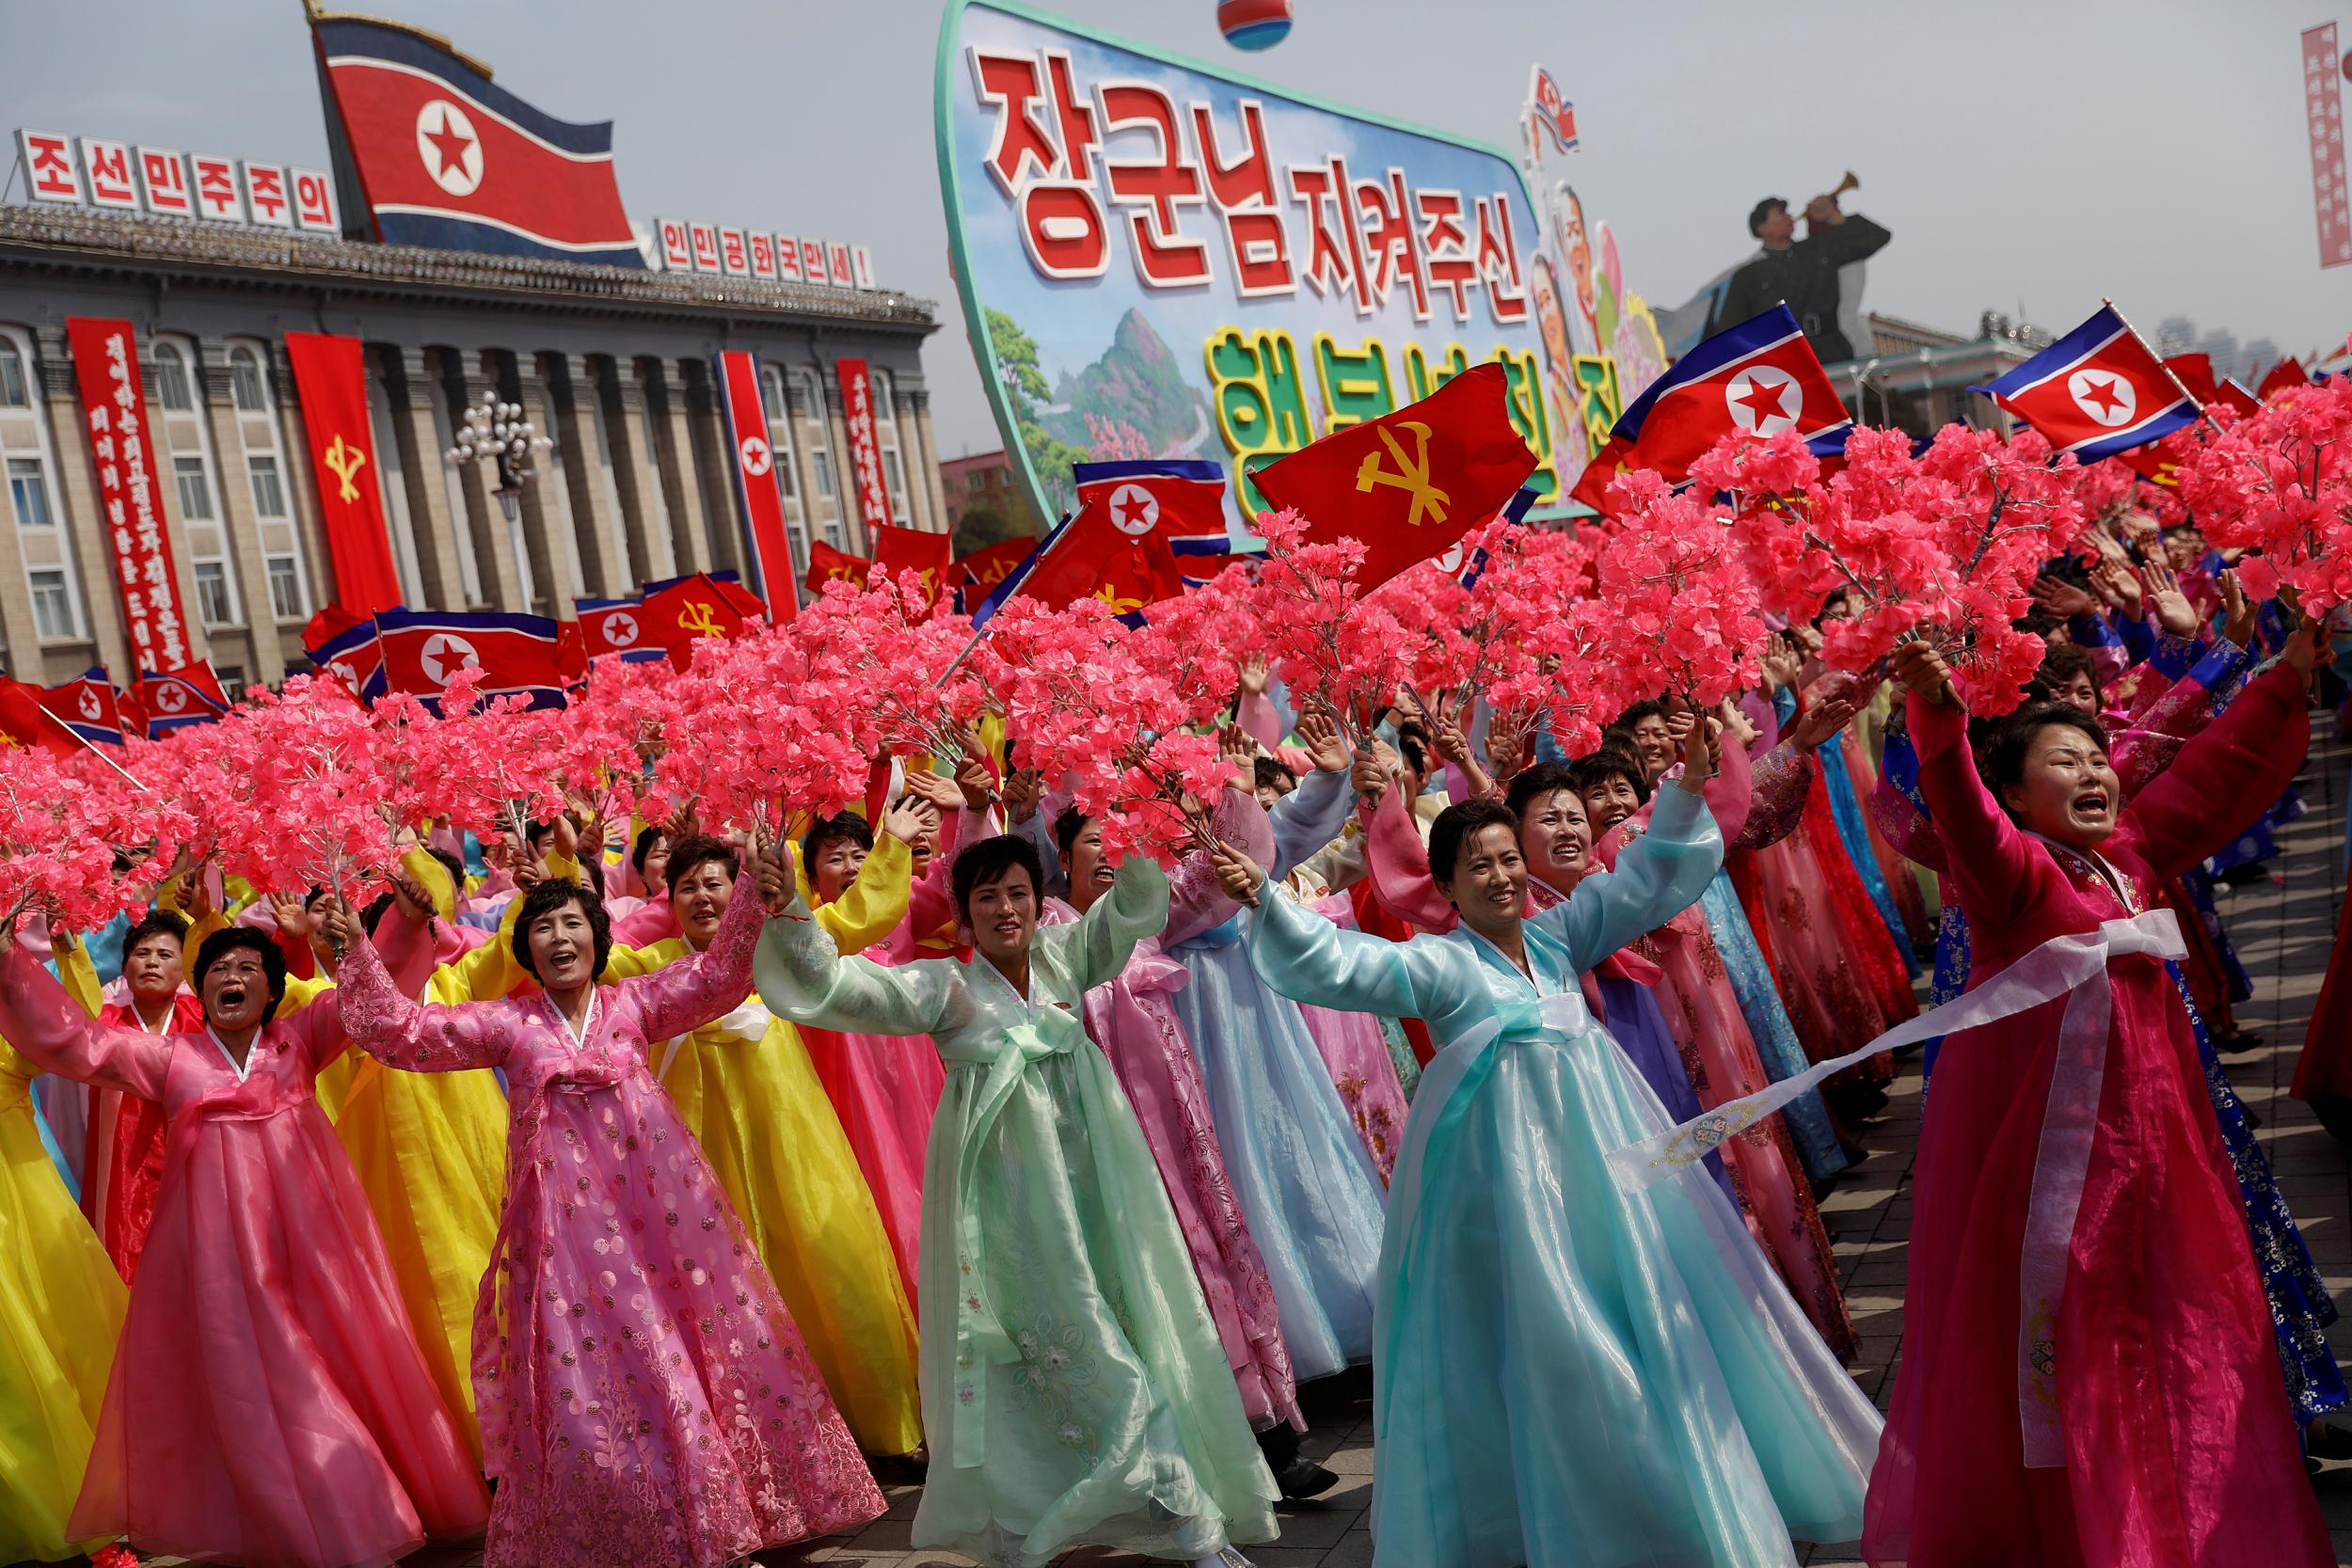 Women wearing traditional clothes react as they march past the stand with North Korean leader Kim Jong-un during a military parade marking the 105th birth anniversary of the country's founding father, Kim Il-sung in Pyongyang